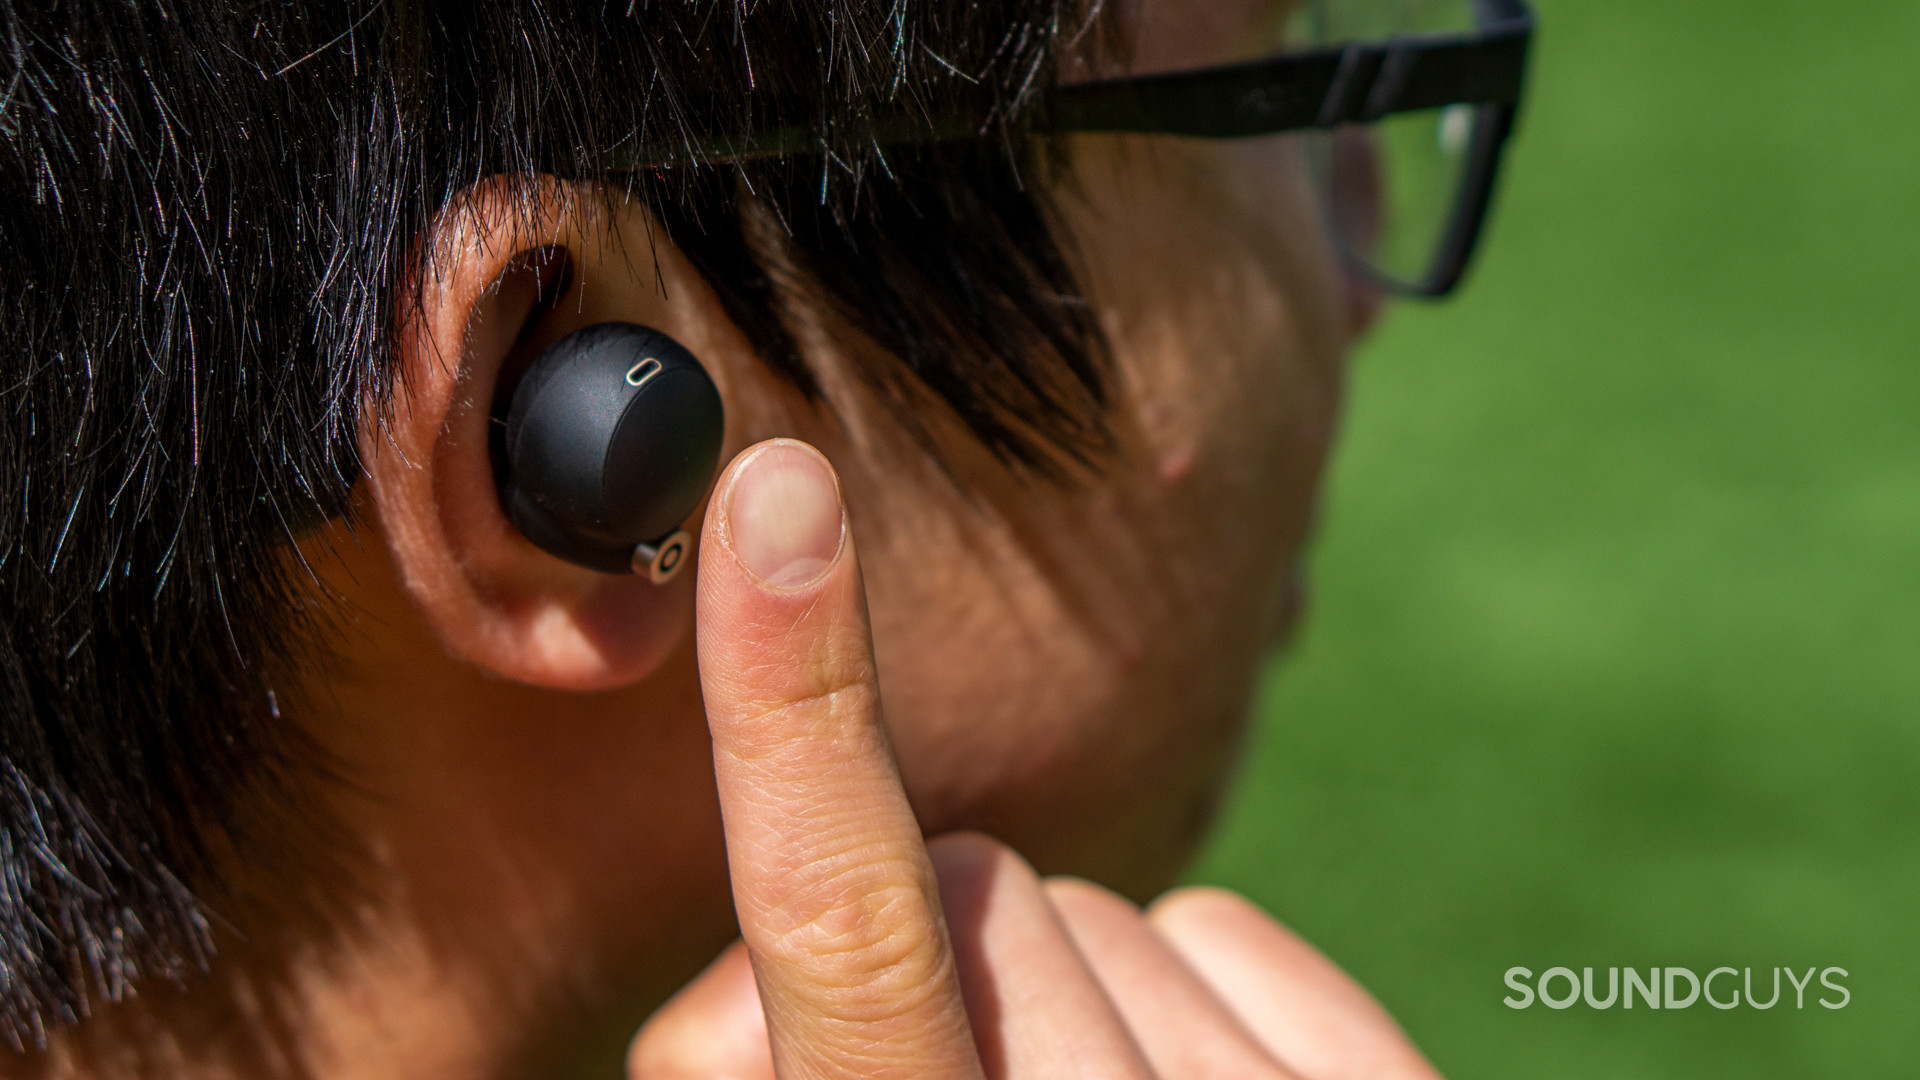 Sony WF-1000XM4 review: Top-tier ANC earbuds - SoundGuys